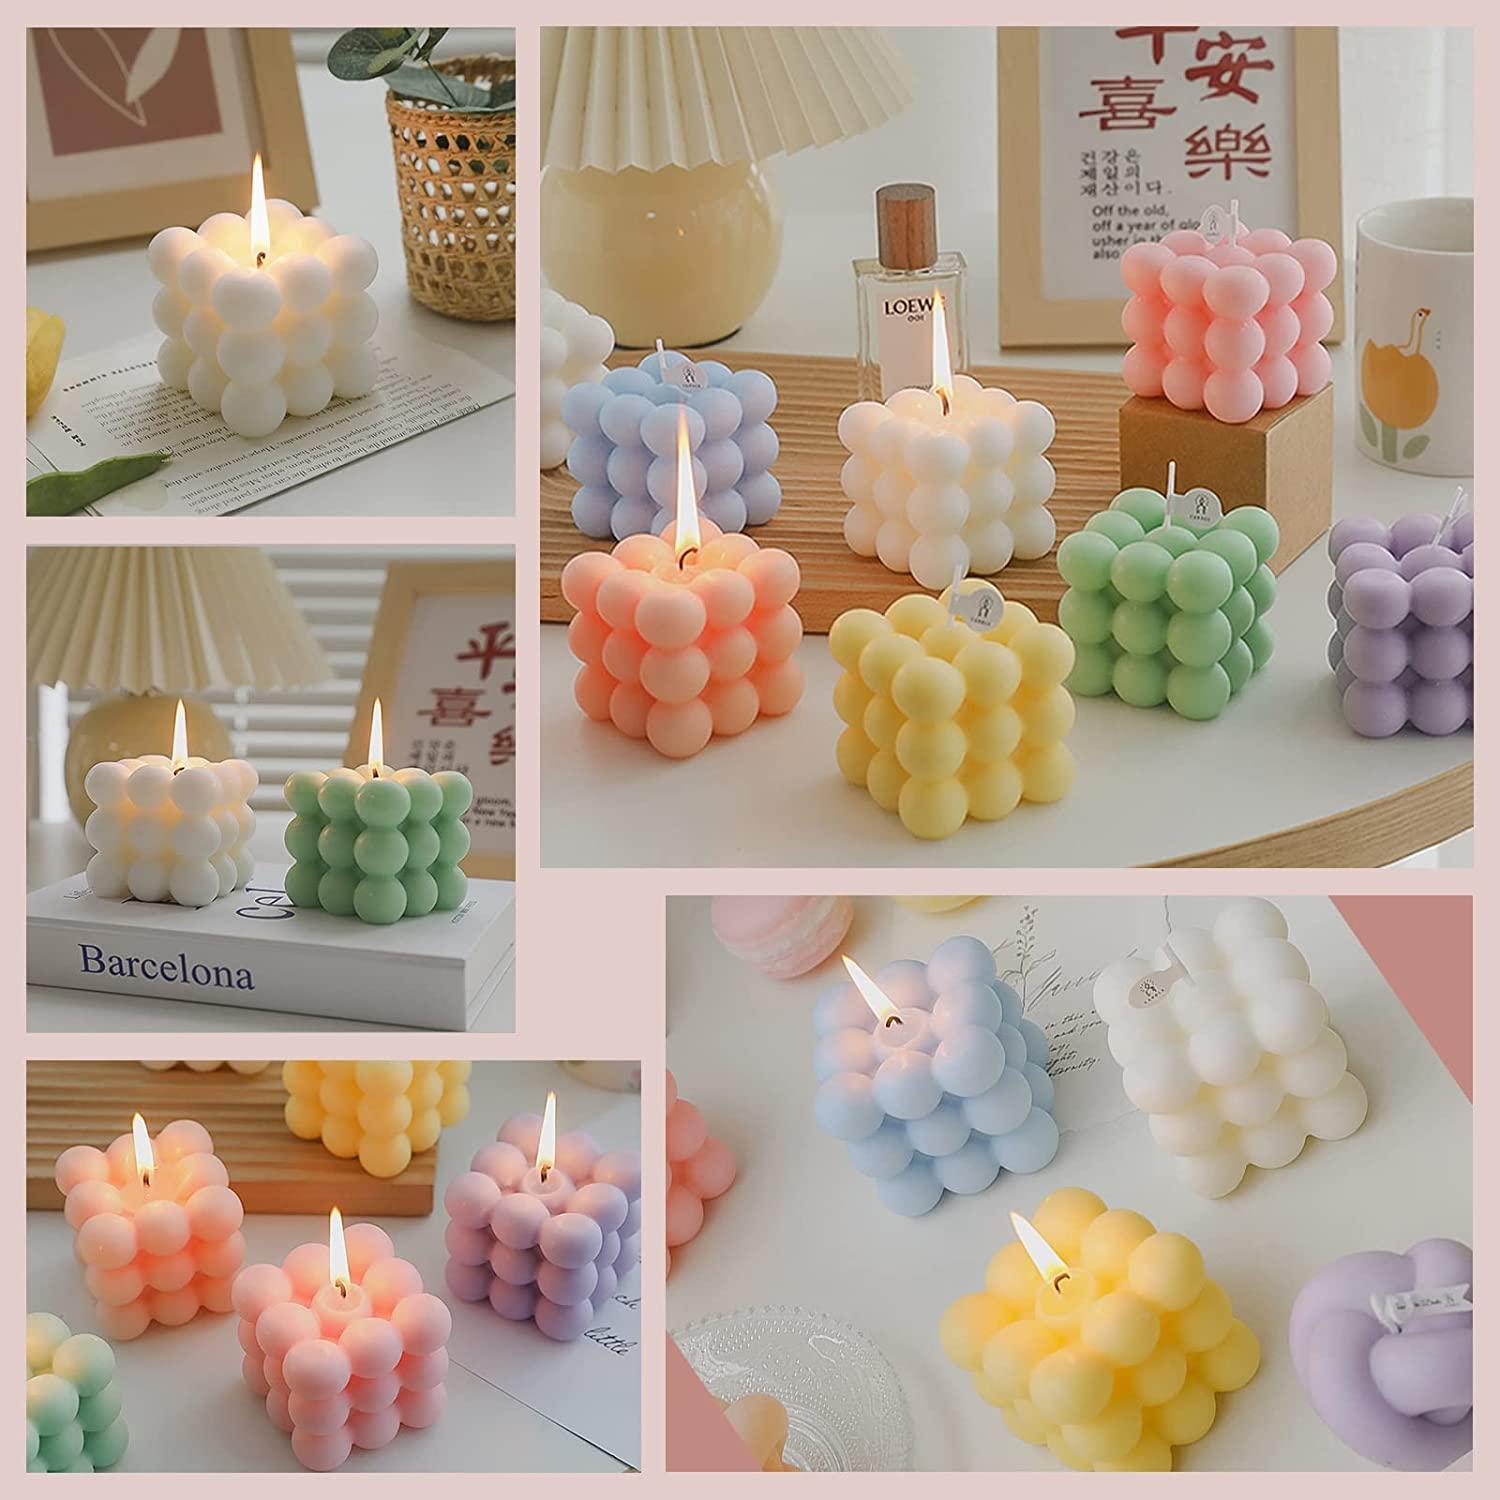 Bubble Cube Candle Scented Soy Wax Candle, Aesthetic Room Decor, Home  Decor, Pastel Candles, Luxury Candle Gift, Bedroom Decor -  Sweden